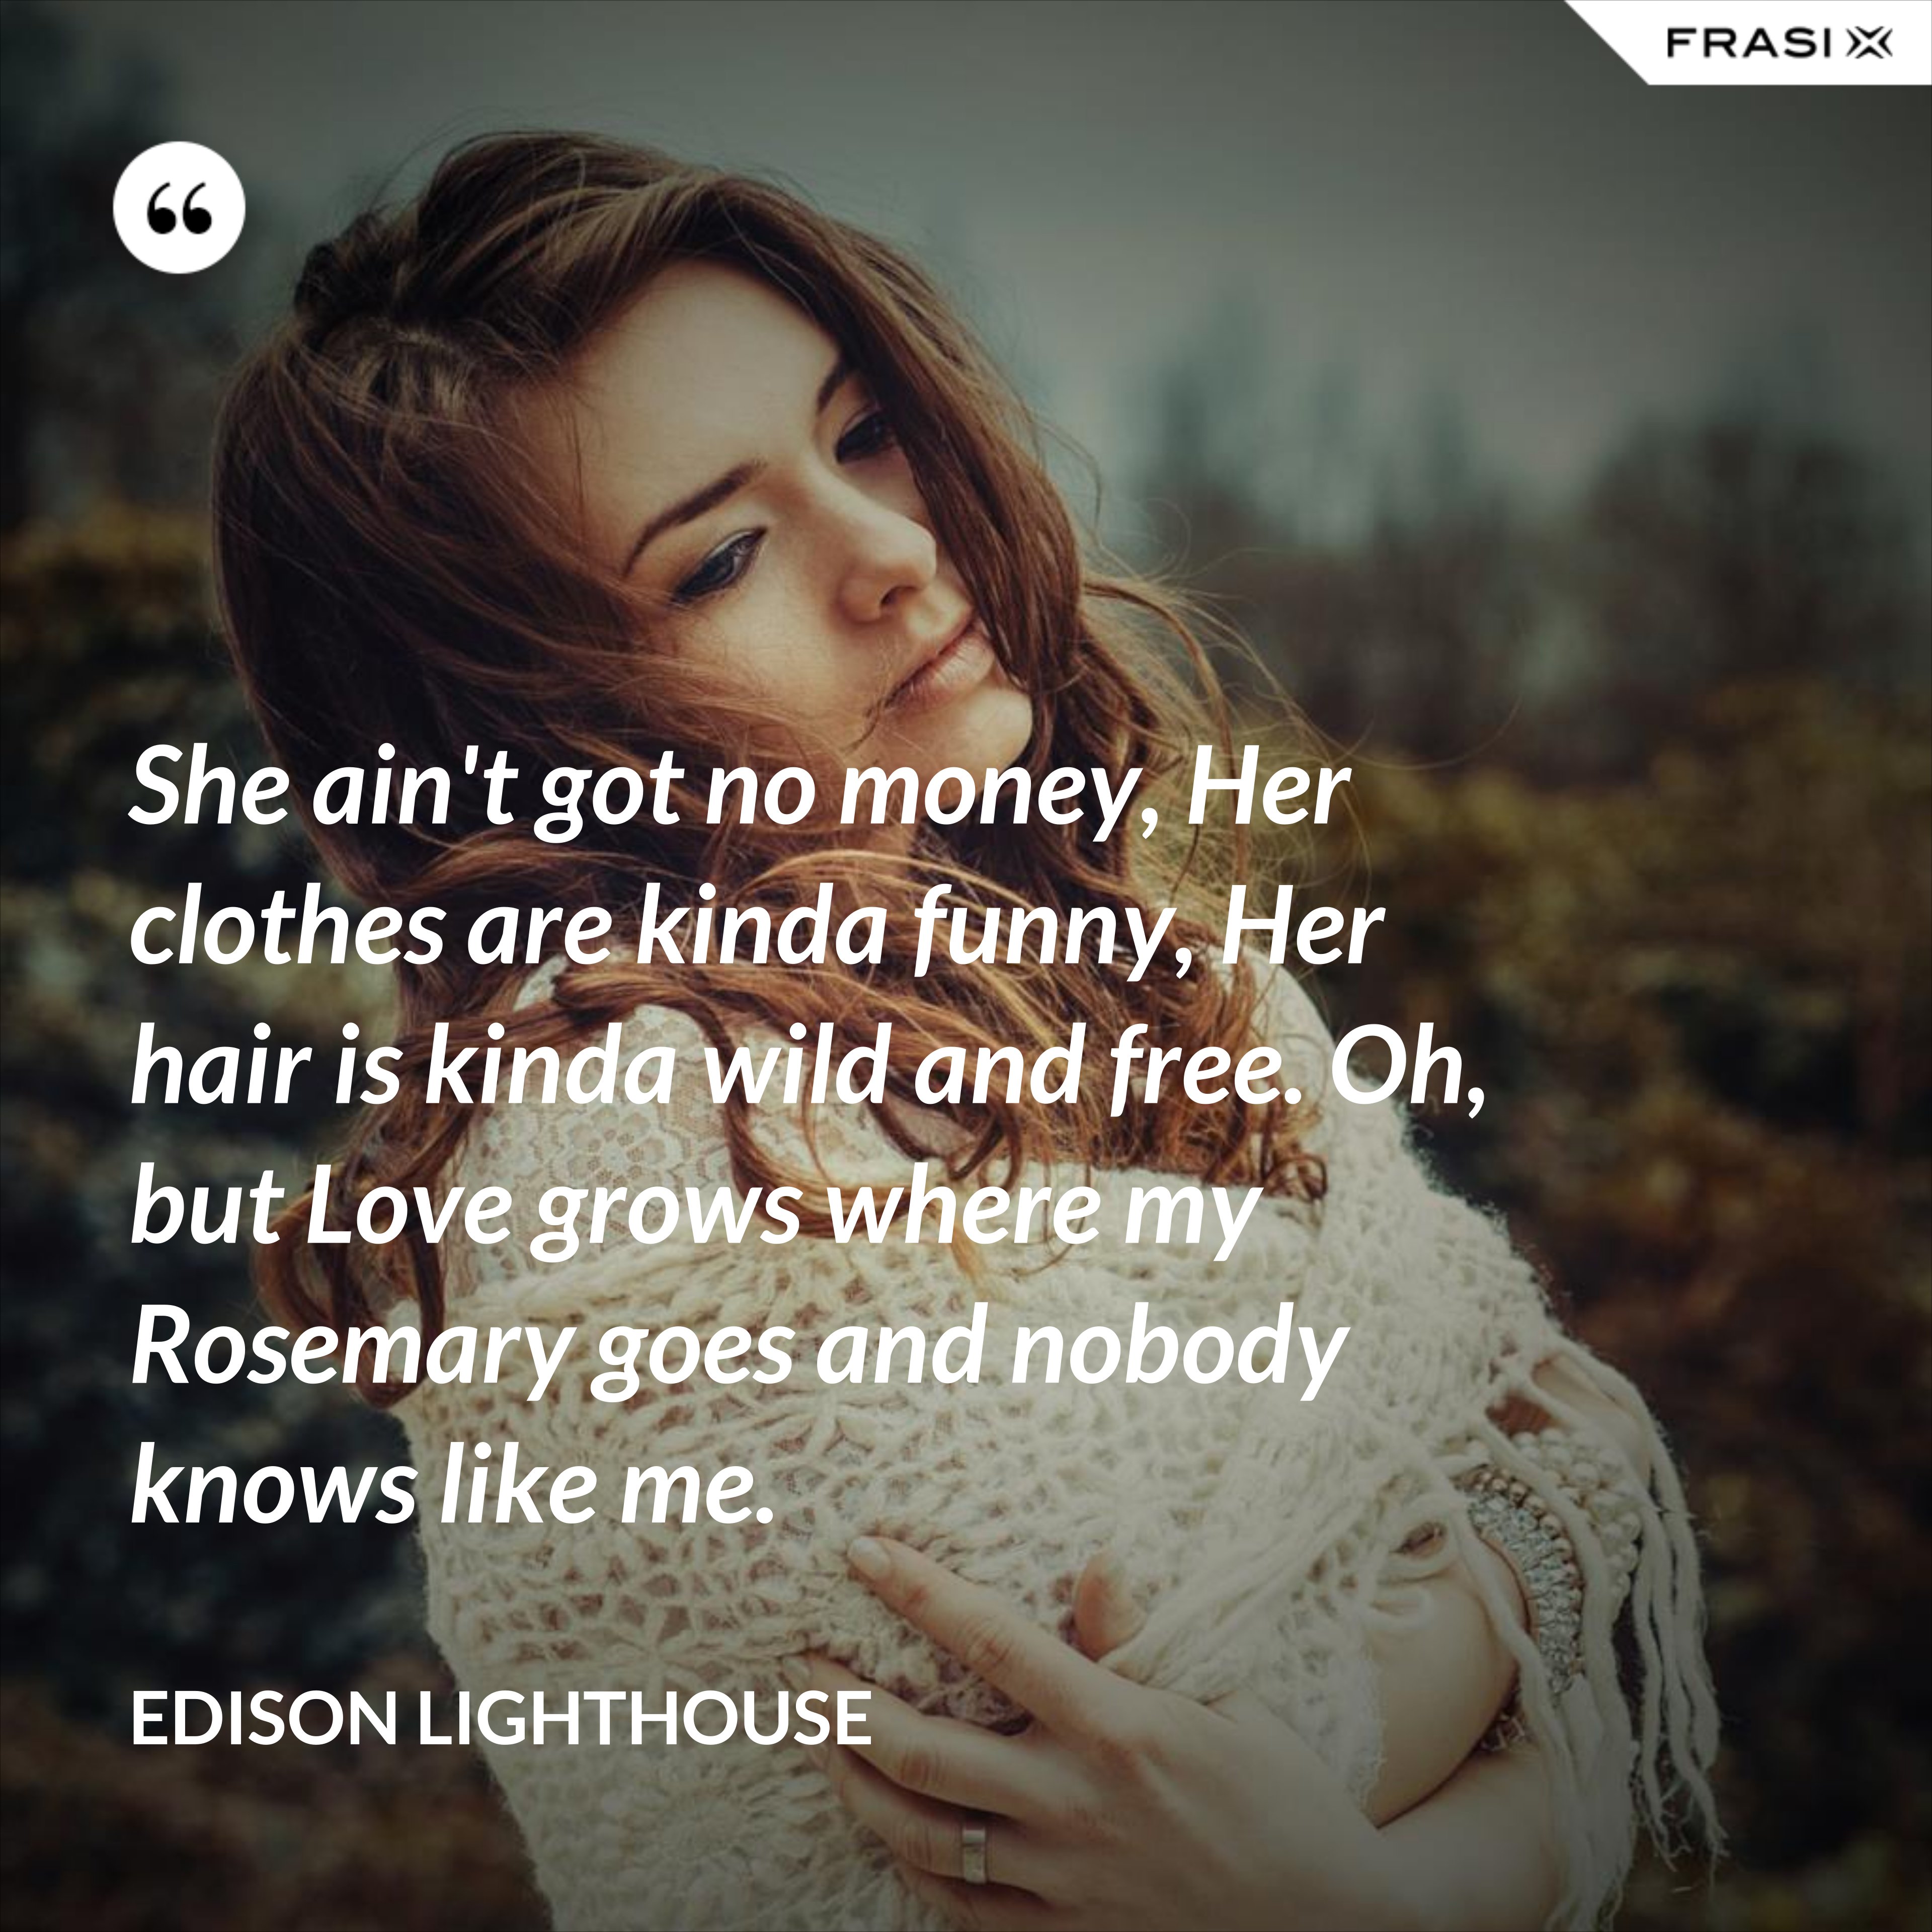 She ain't got no money, Her clothes are kinda funny, Her hair is kinda wild and free. Oh, but Love grows where my Rosemary goes and nobody knows like me. - Edison Lighthouse